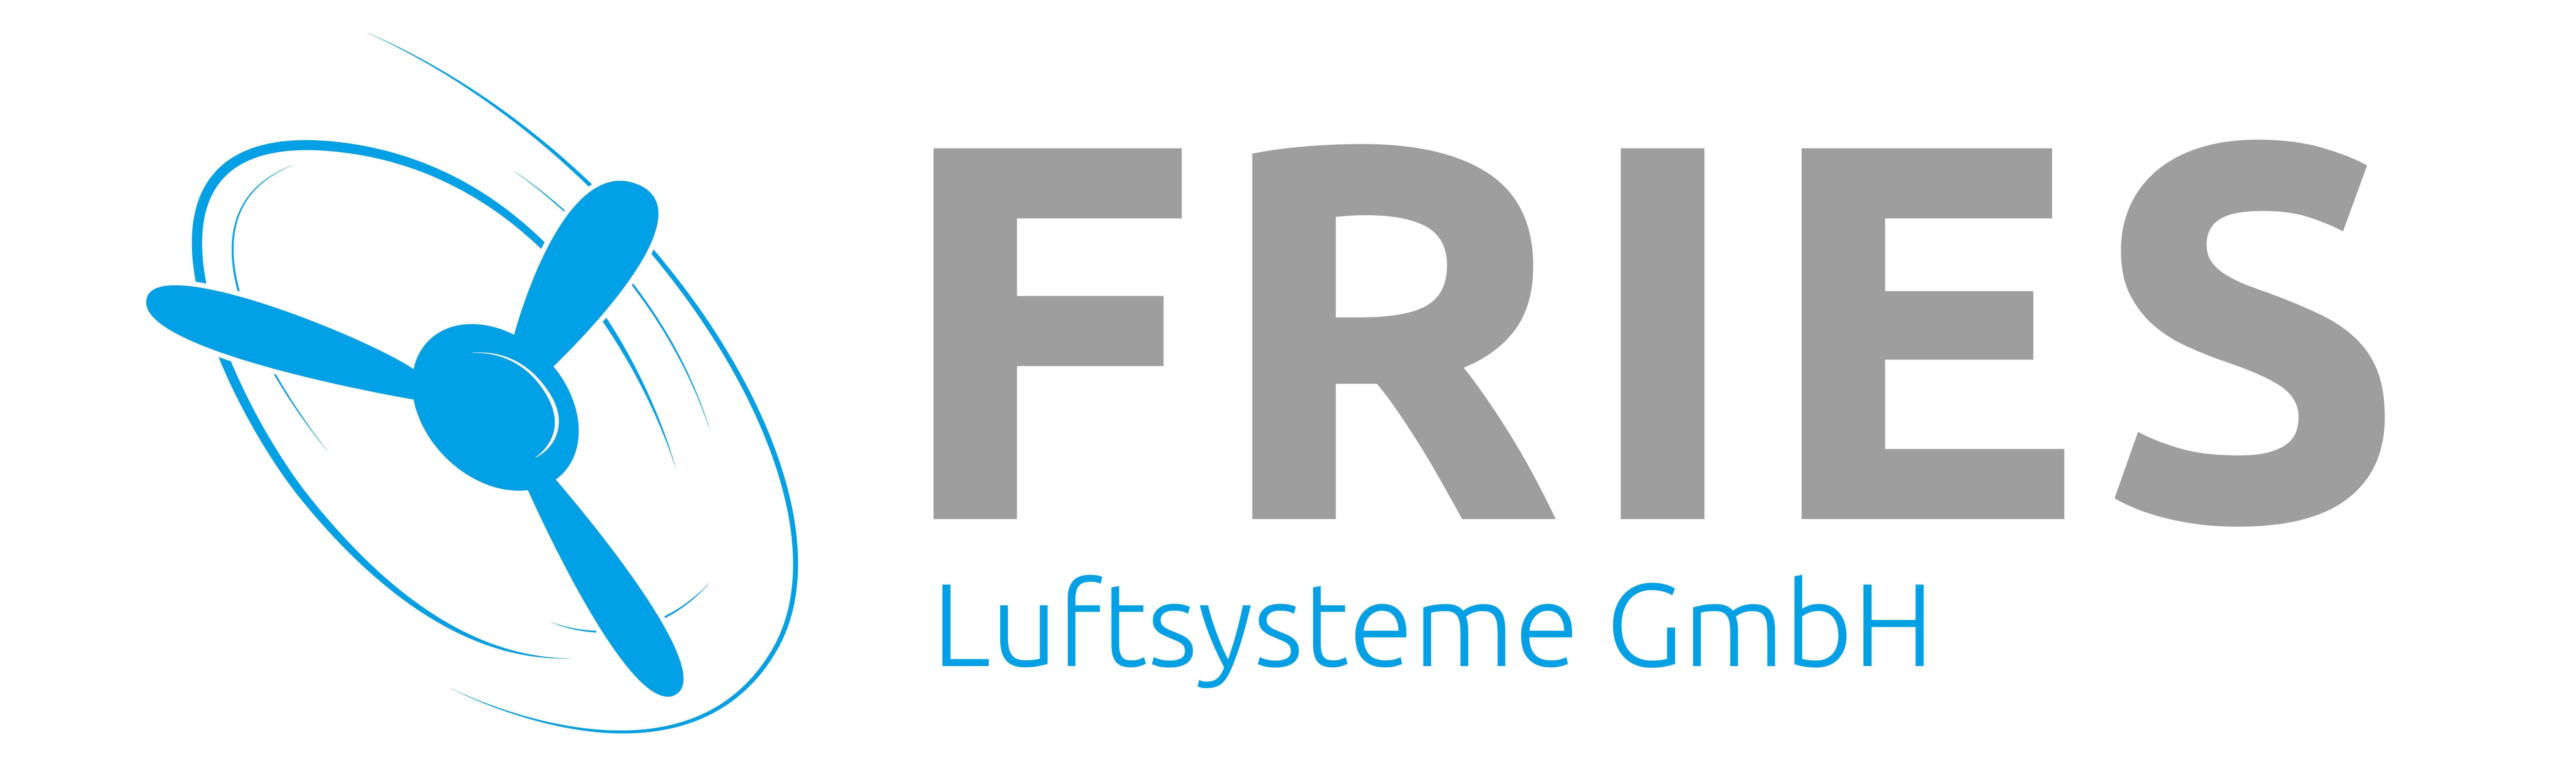 logo_fries_luftsysteme_weiss_gmbh-01.png